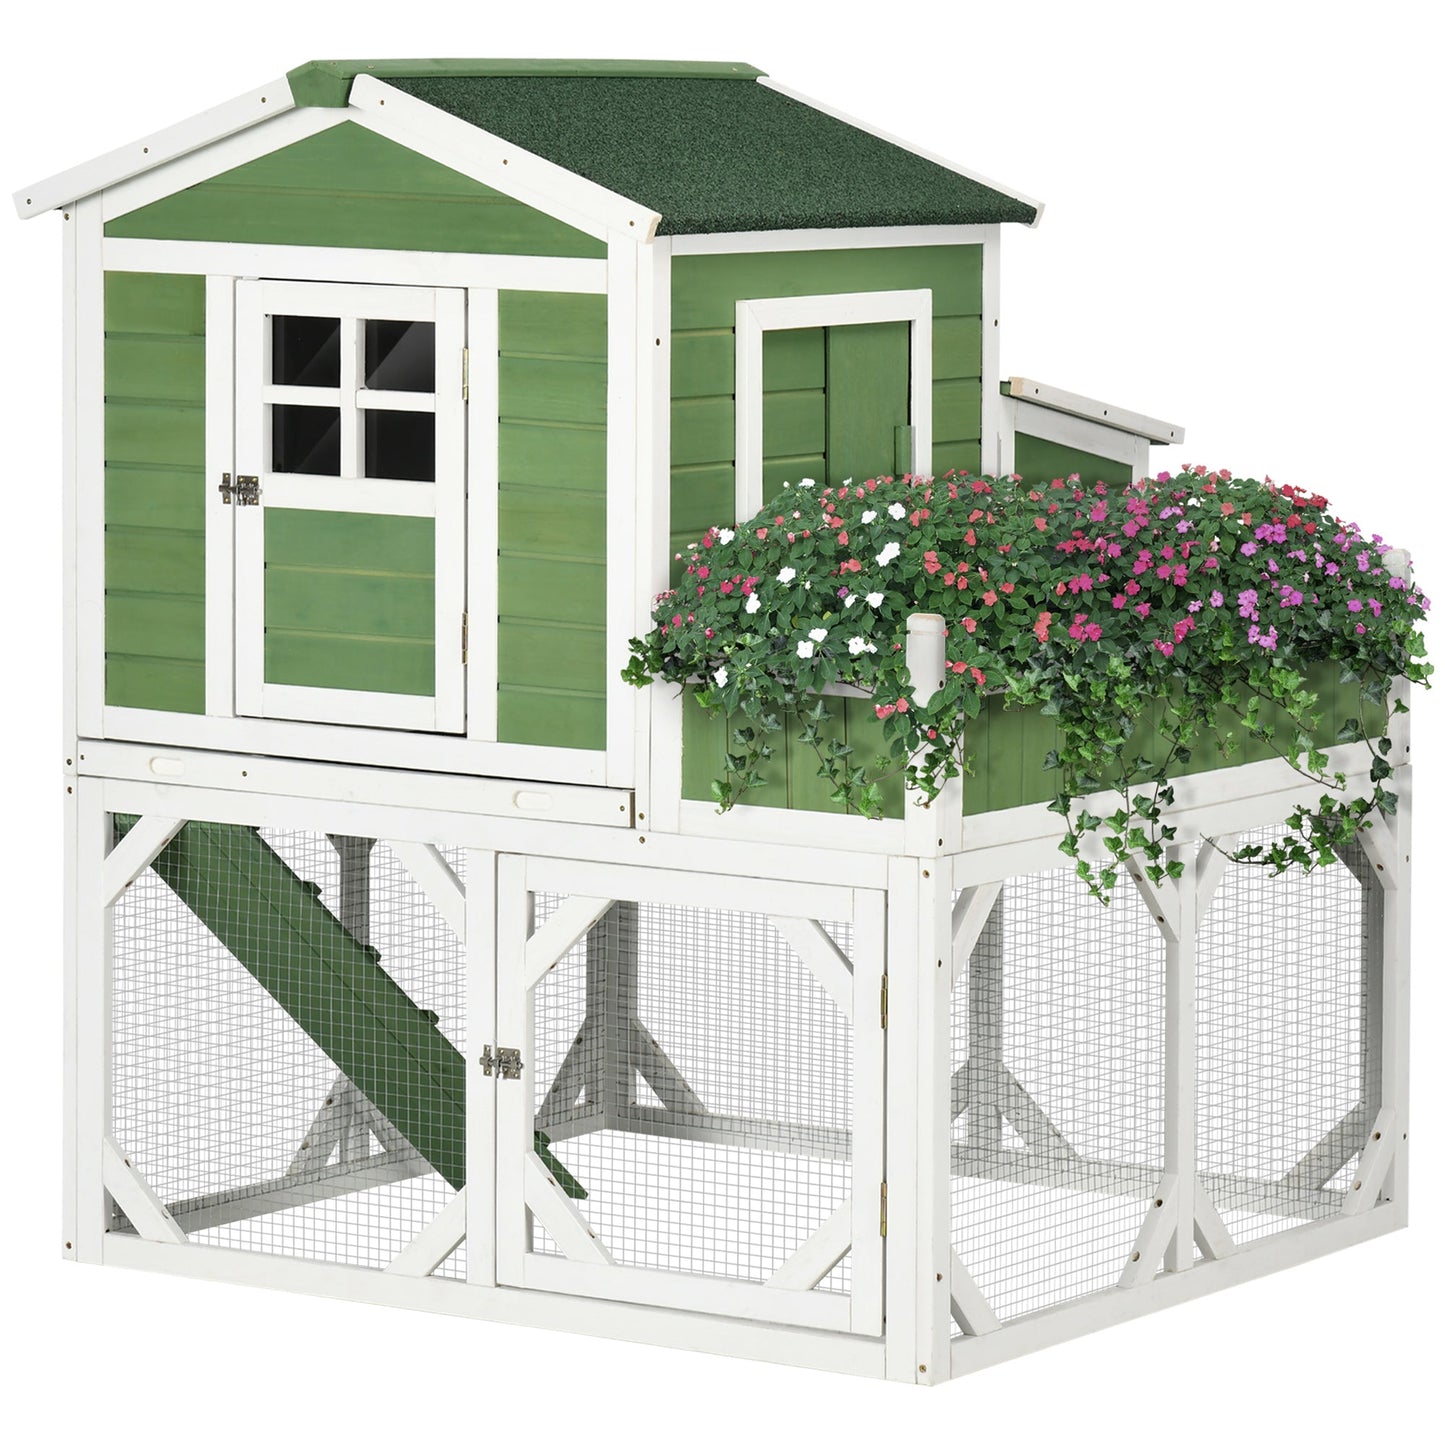 Miscellaneous-49" Chicken Coop, Wooden Hen Run House, Quail hutch with Nesting Box, Slide-out Tray, Asphalt Roof, Planting Lattice, Green - Outdoor Style Company